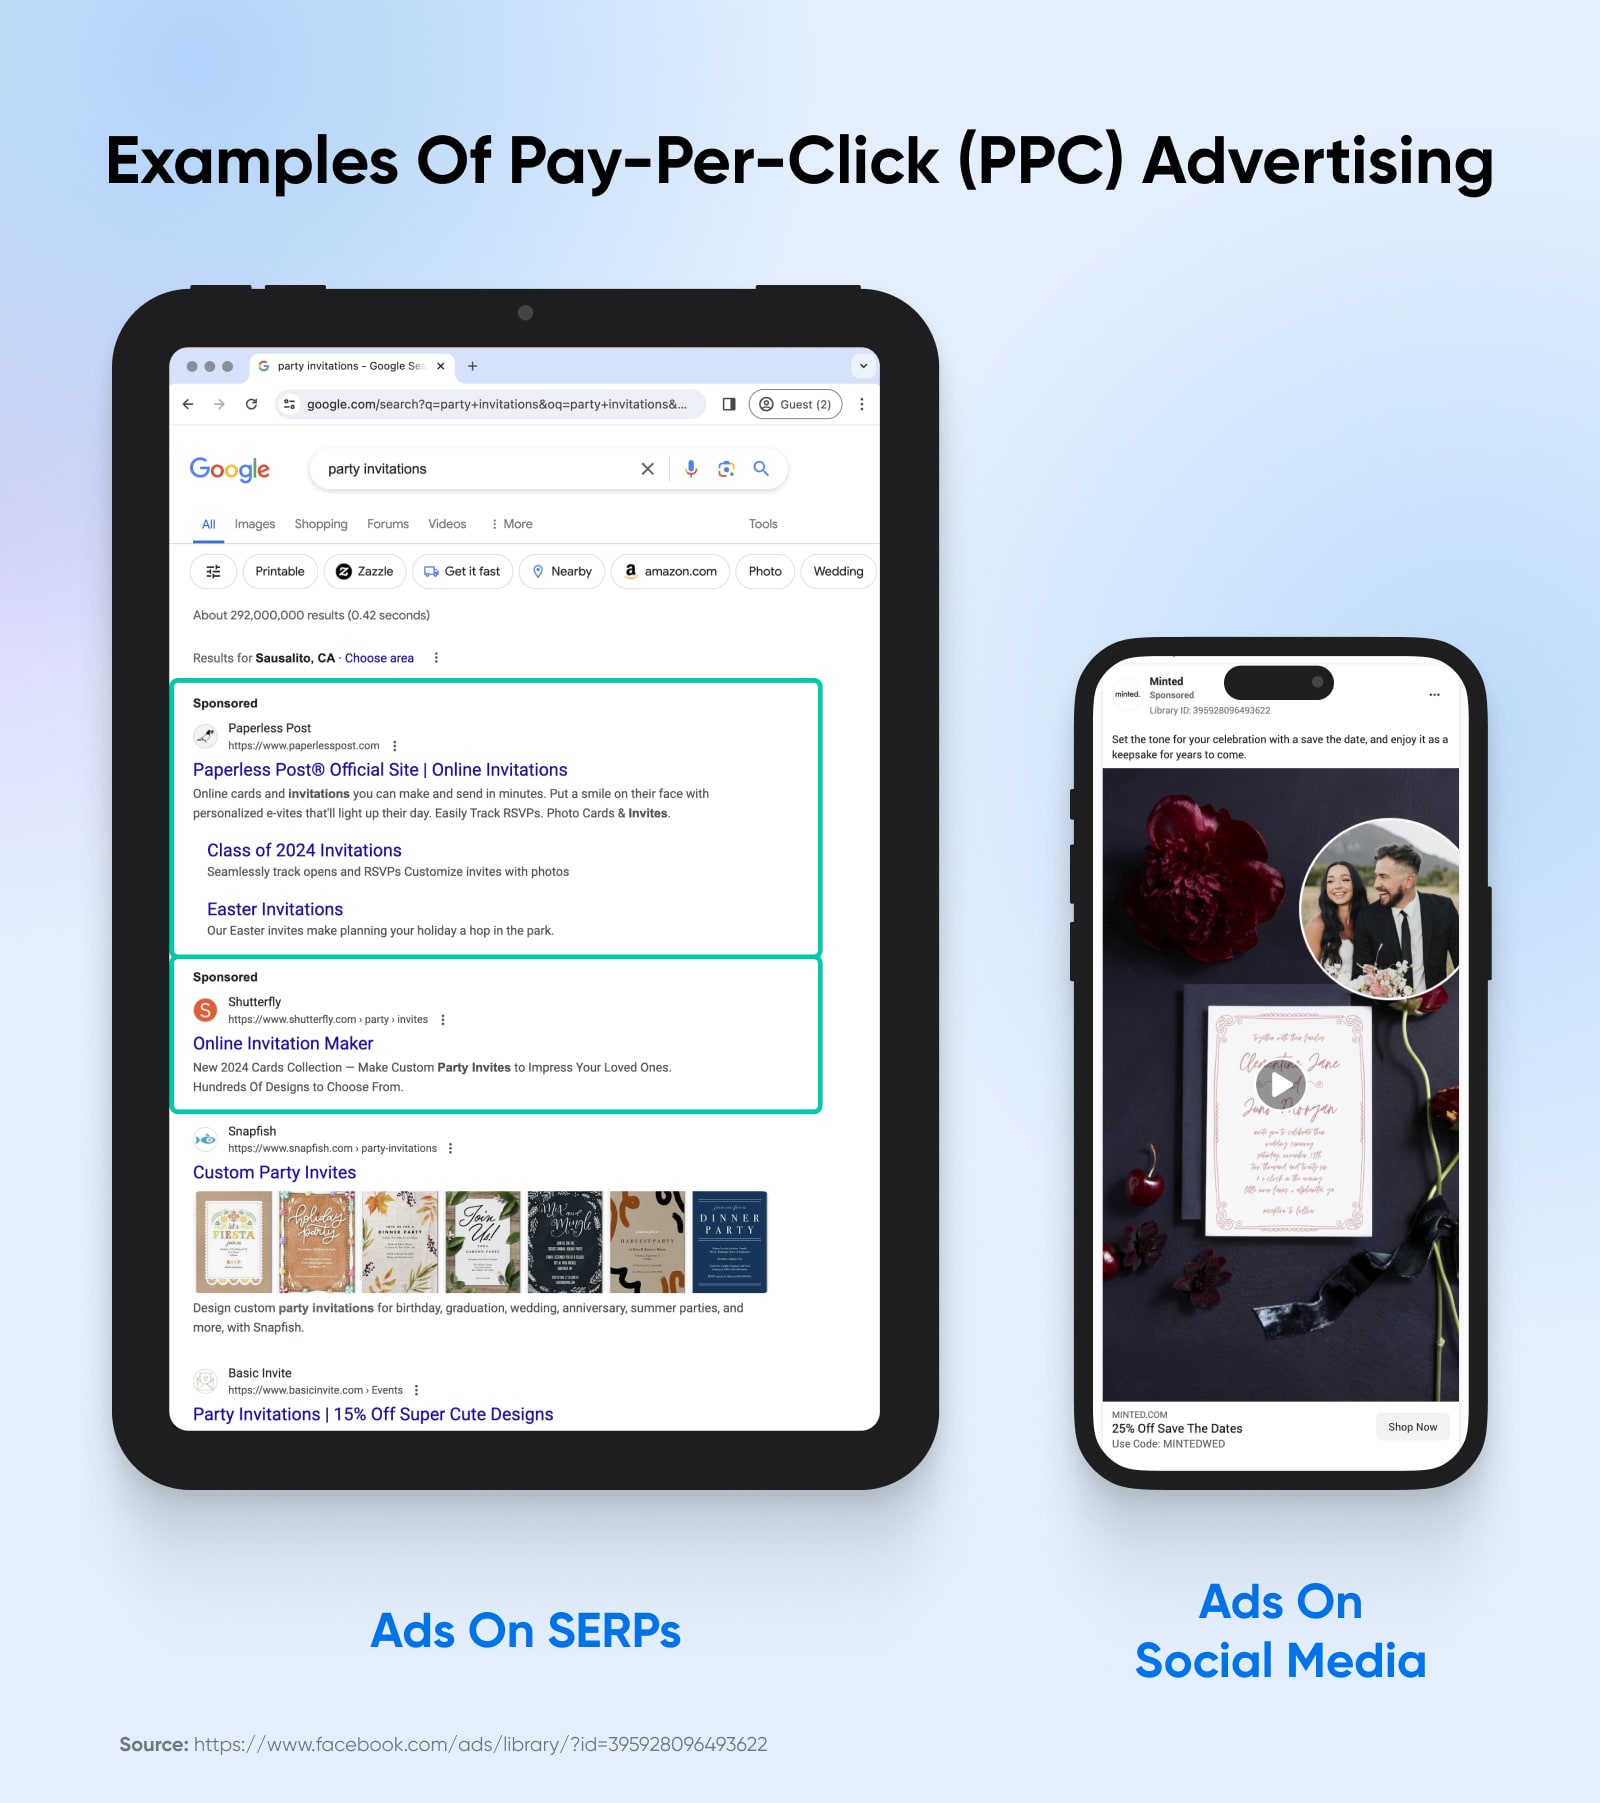 Against a blue background, an iPad shows examples of ads on SERPs and a phone shows examples of ads on social media